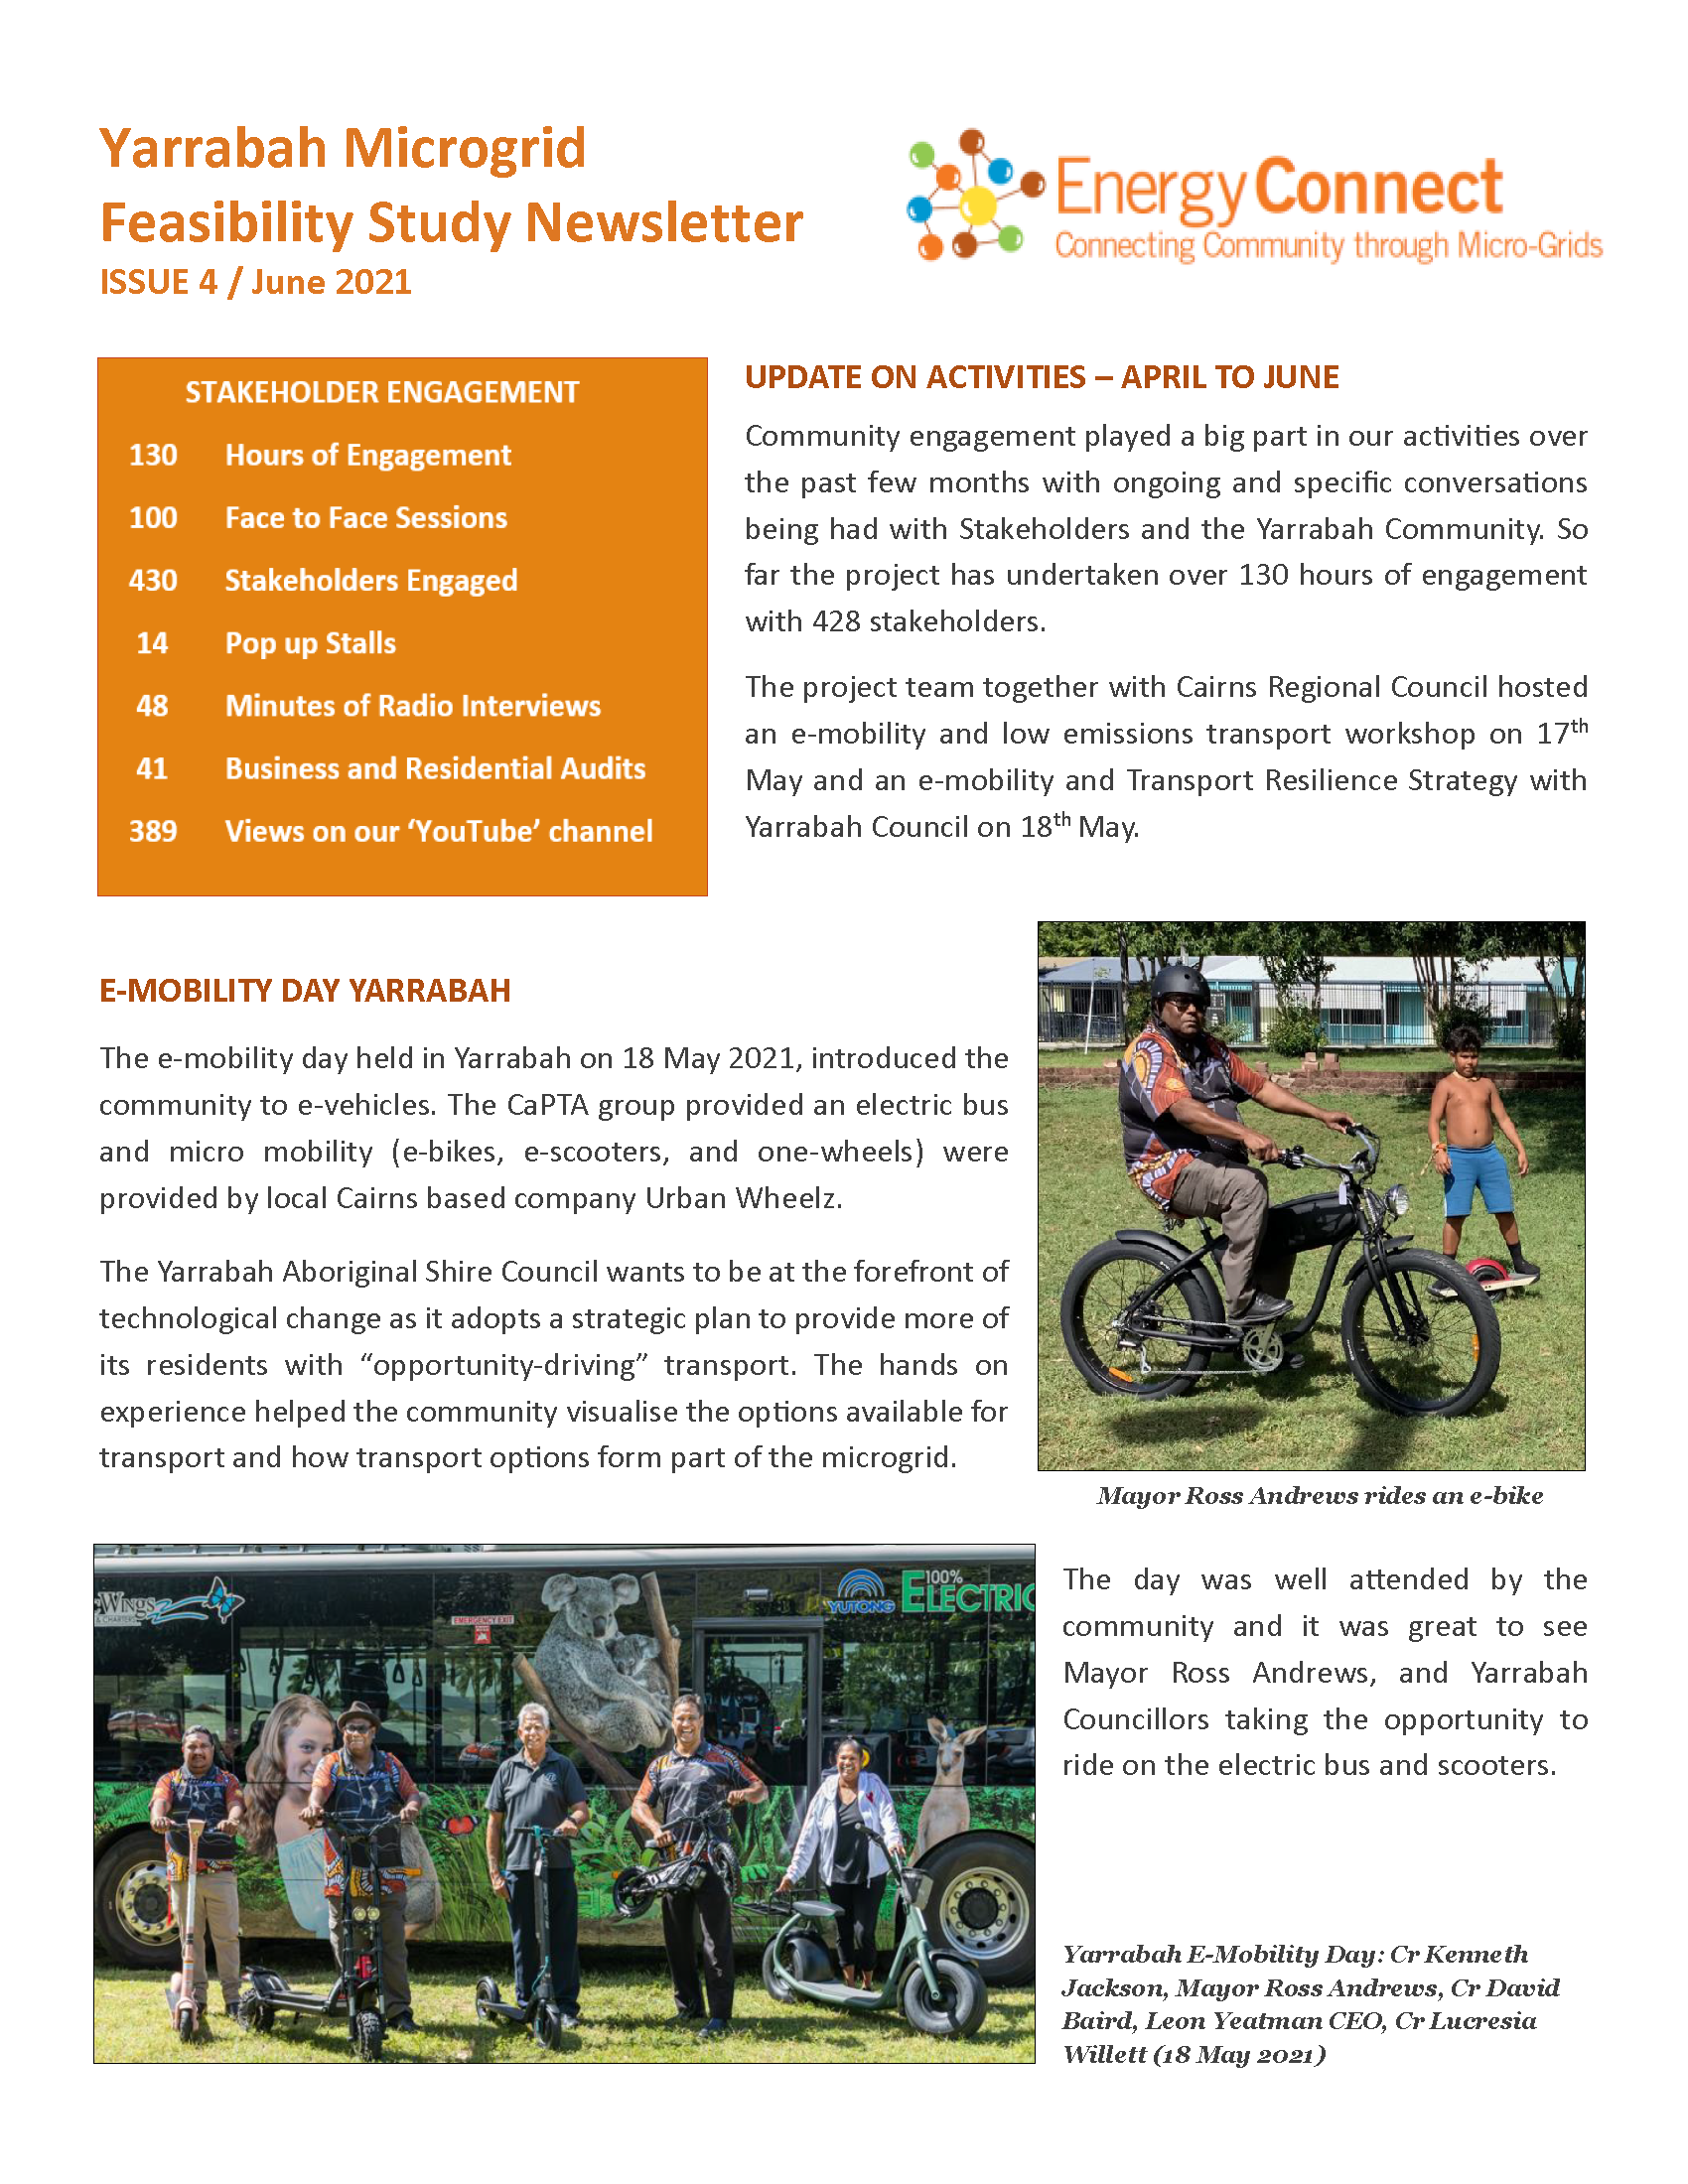 EnergyConnect - Yarrabah Microgrid Newsletter - Issue 4